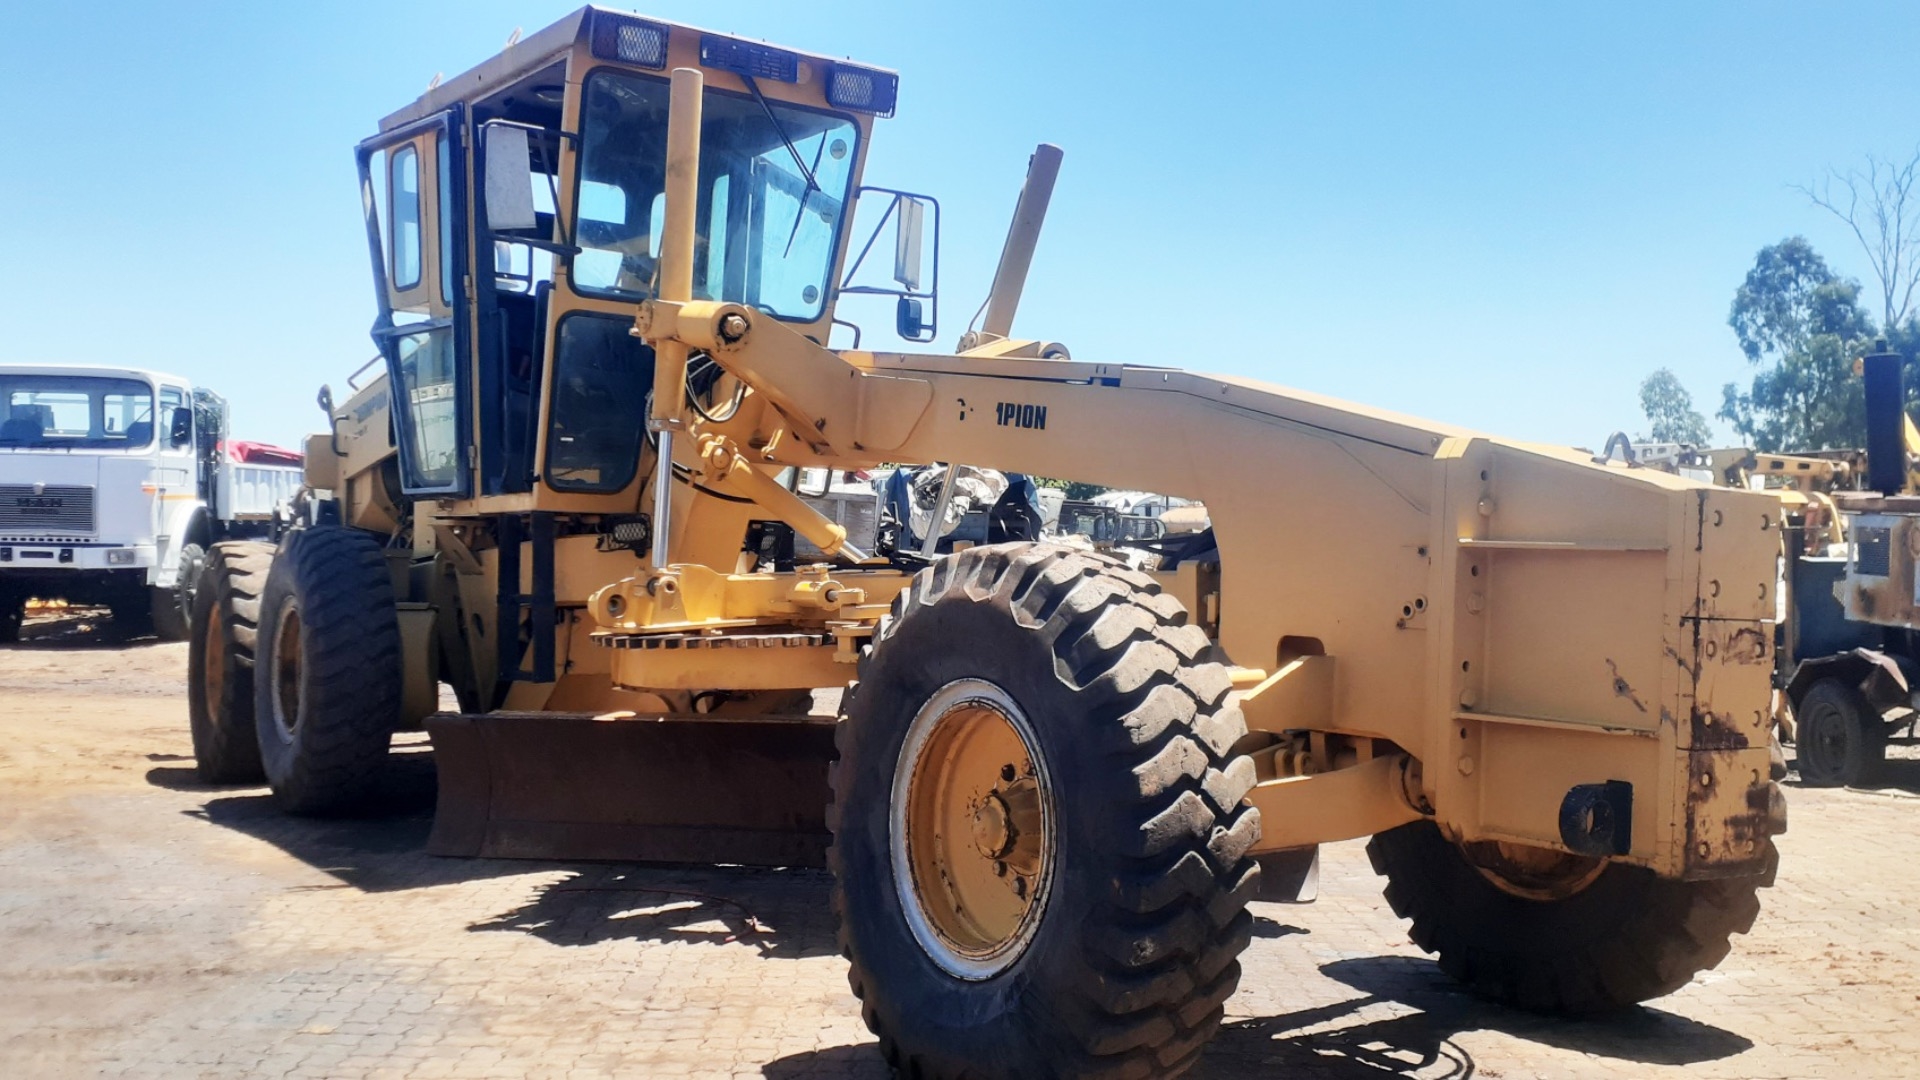 Champion Graders Champion 710A Grader with Ripper 1997 for sale by D and O truck and plant | Truck & Trailer Marketplace